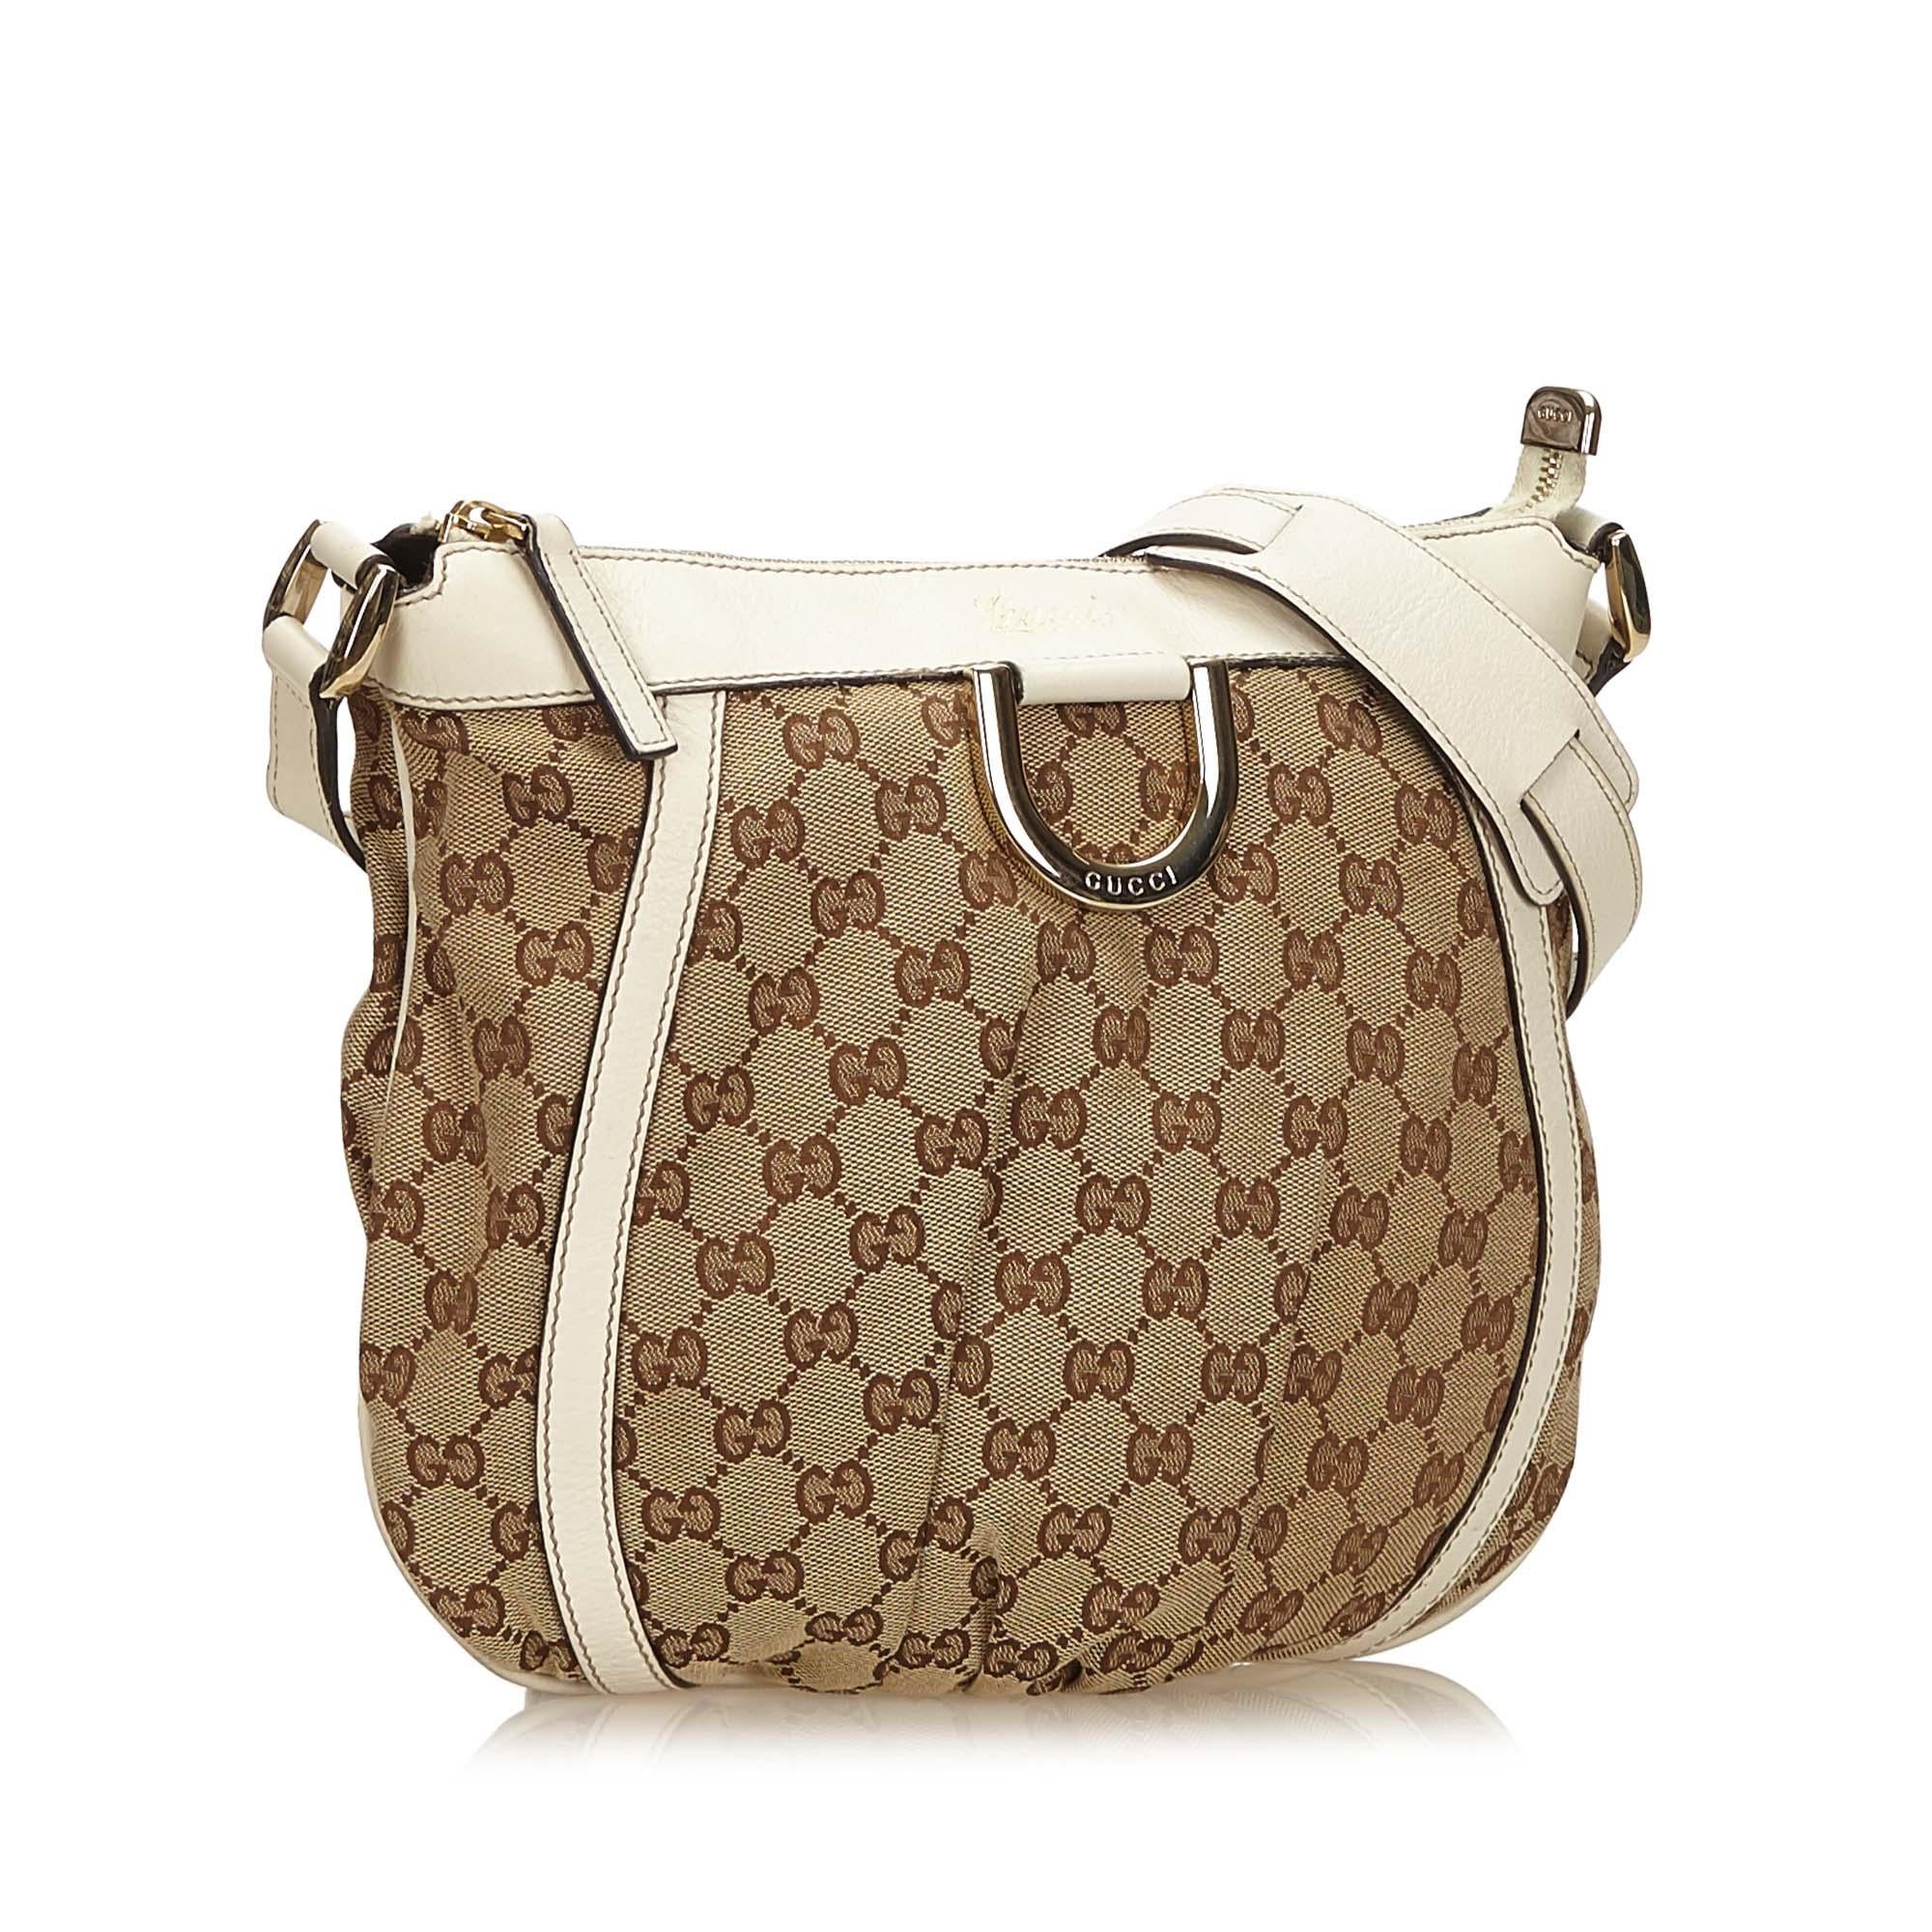 This crossbody bag features a jacquard body with leather trim, flat leather strap, top zip closure, and interior zip pocket. It carries as B+ condition rating.

Inclusions: 
This item does not come with inclusions.

Dimensions:
Length: 26.00